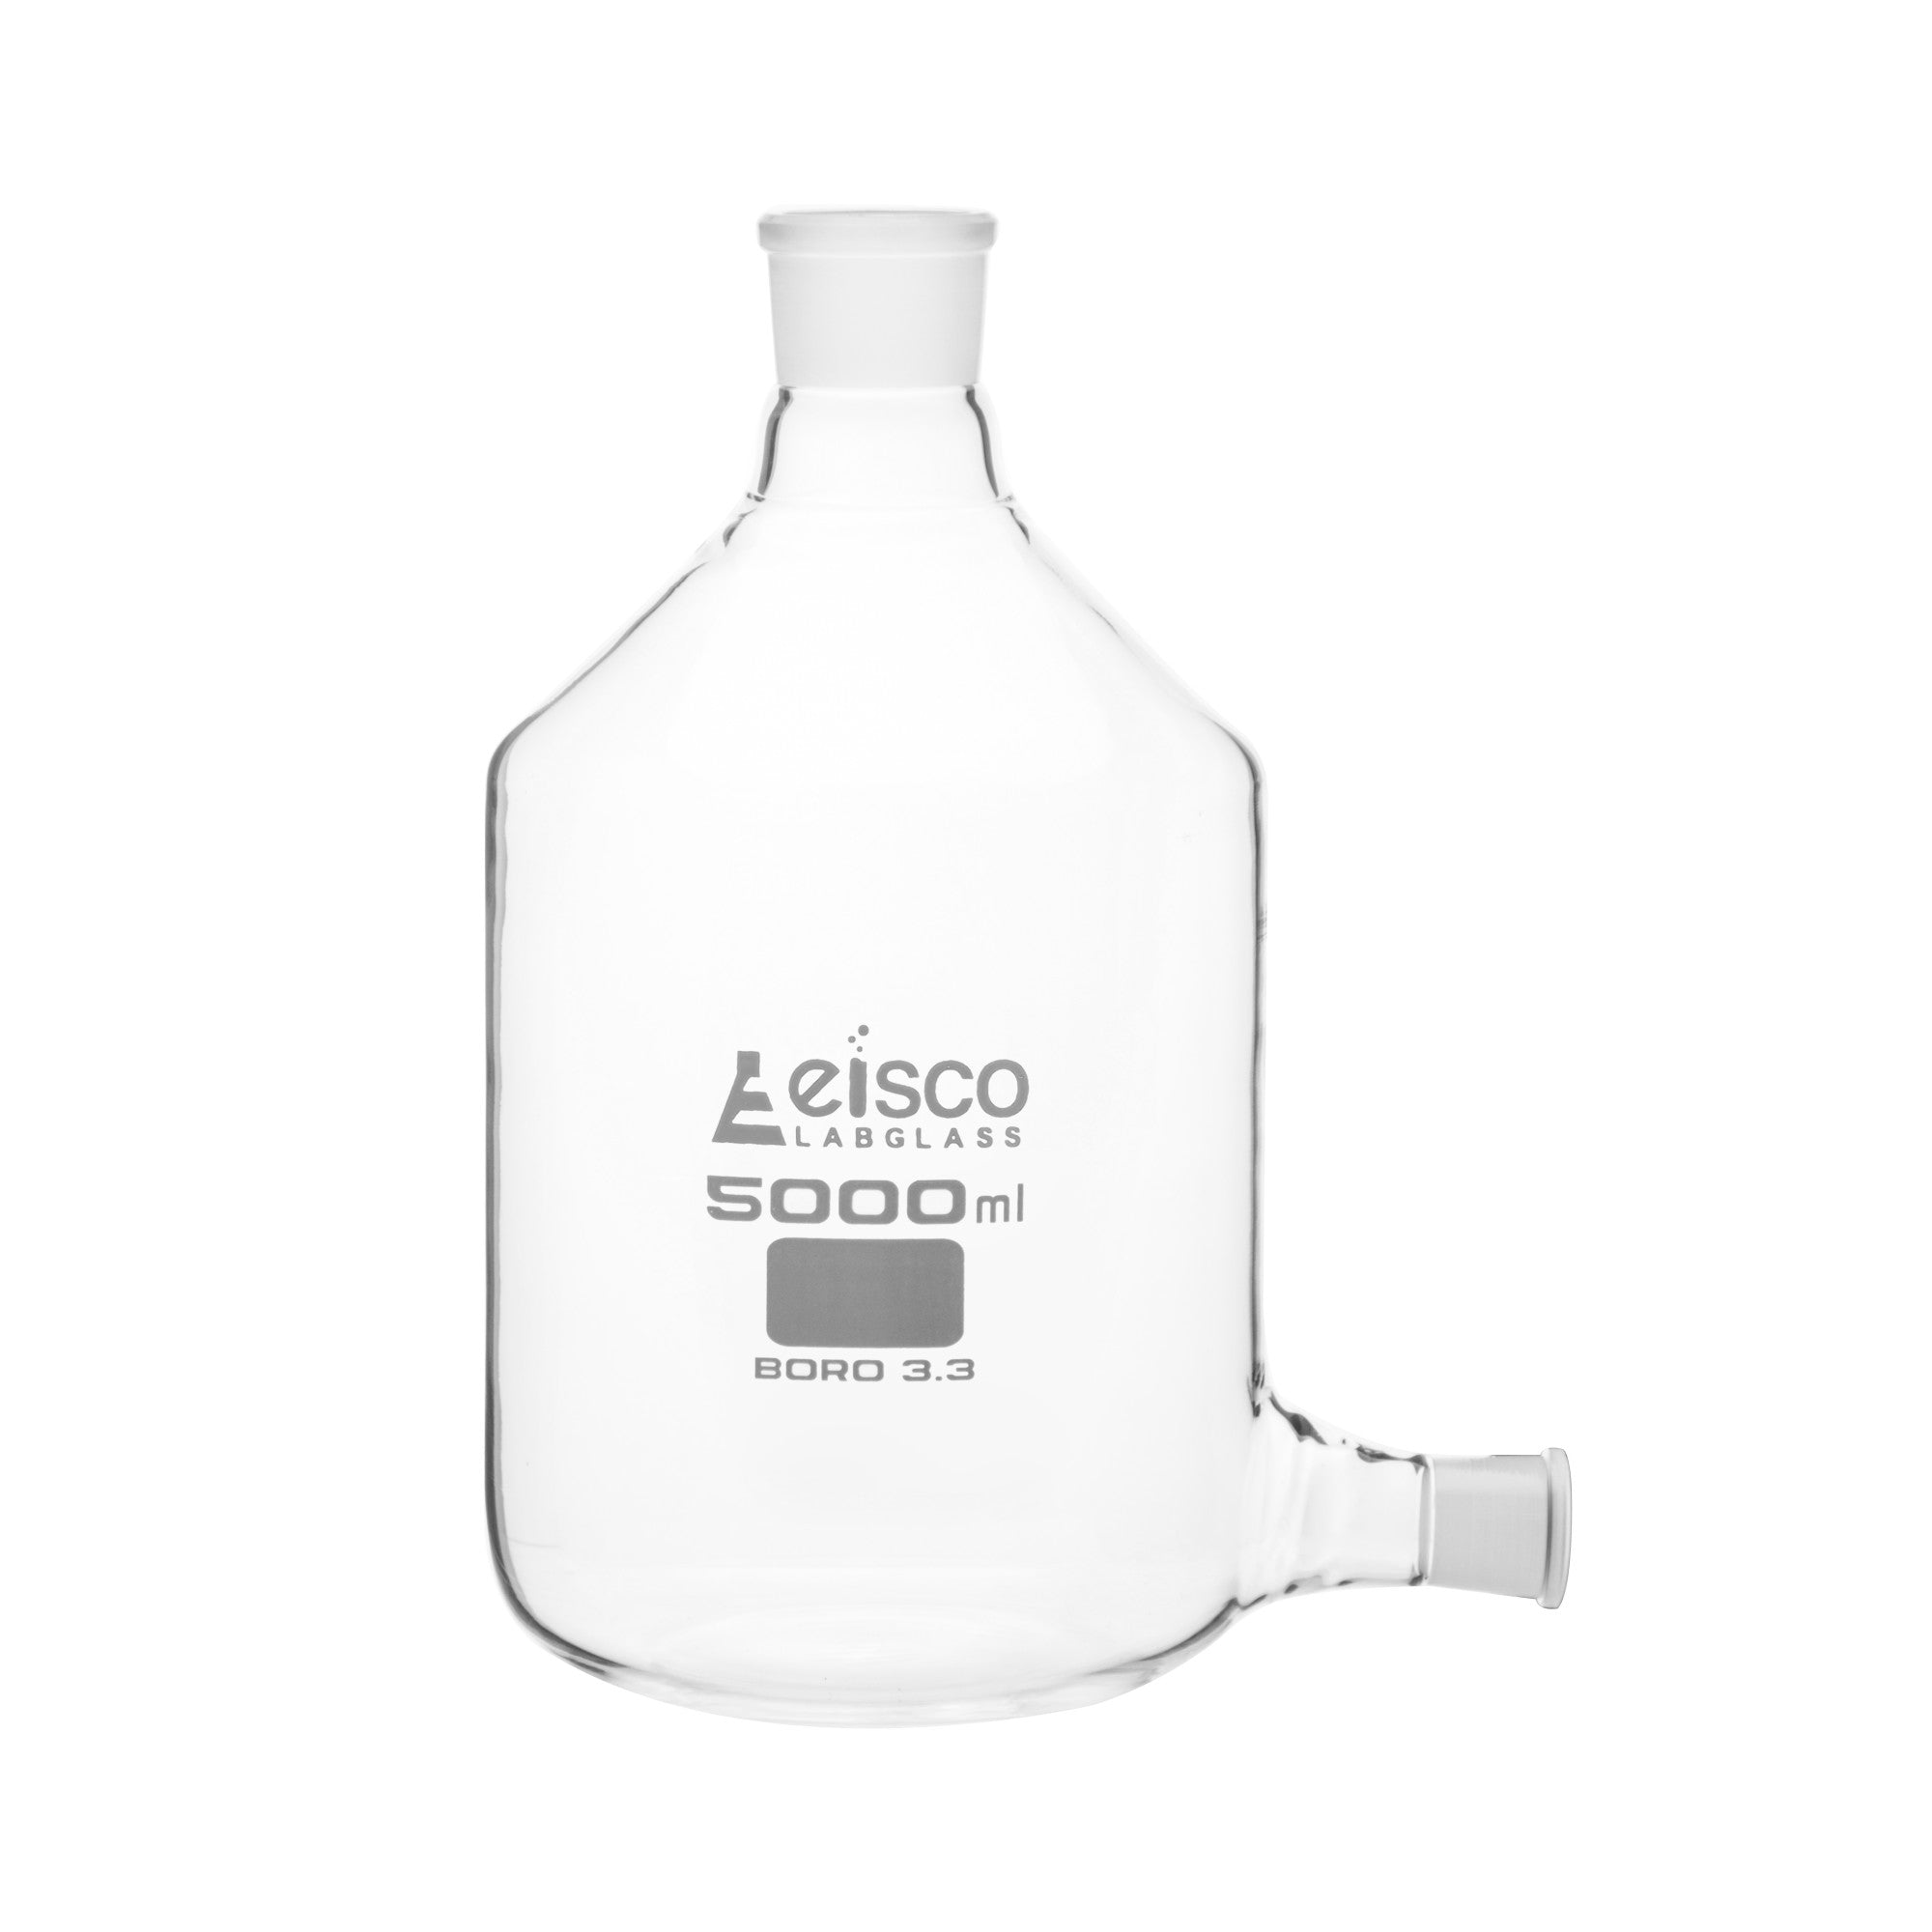 Borosilicate Aspirator Bottle with Outlet for Stopcock, 5000ml, Autoclavable